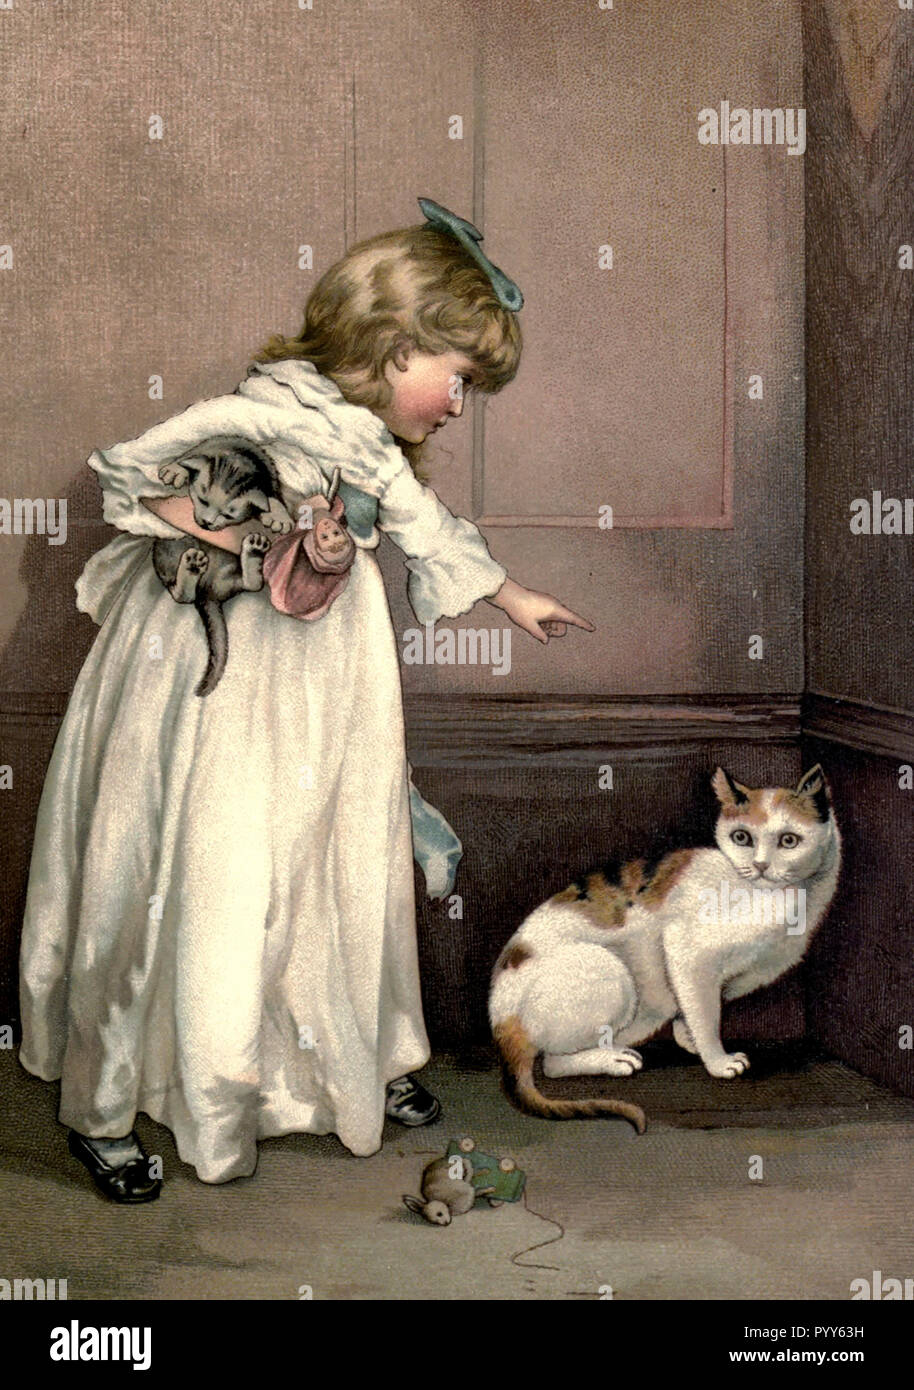 A little girl orders a cat into the corner during the Victorian Era Stock Photo